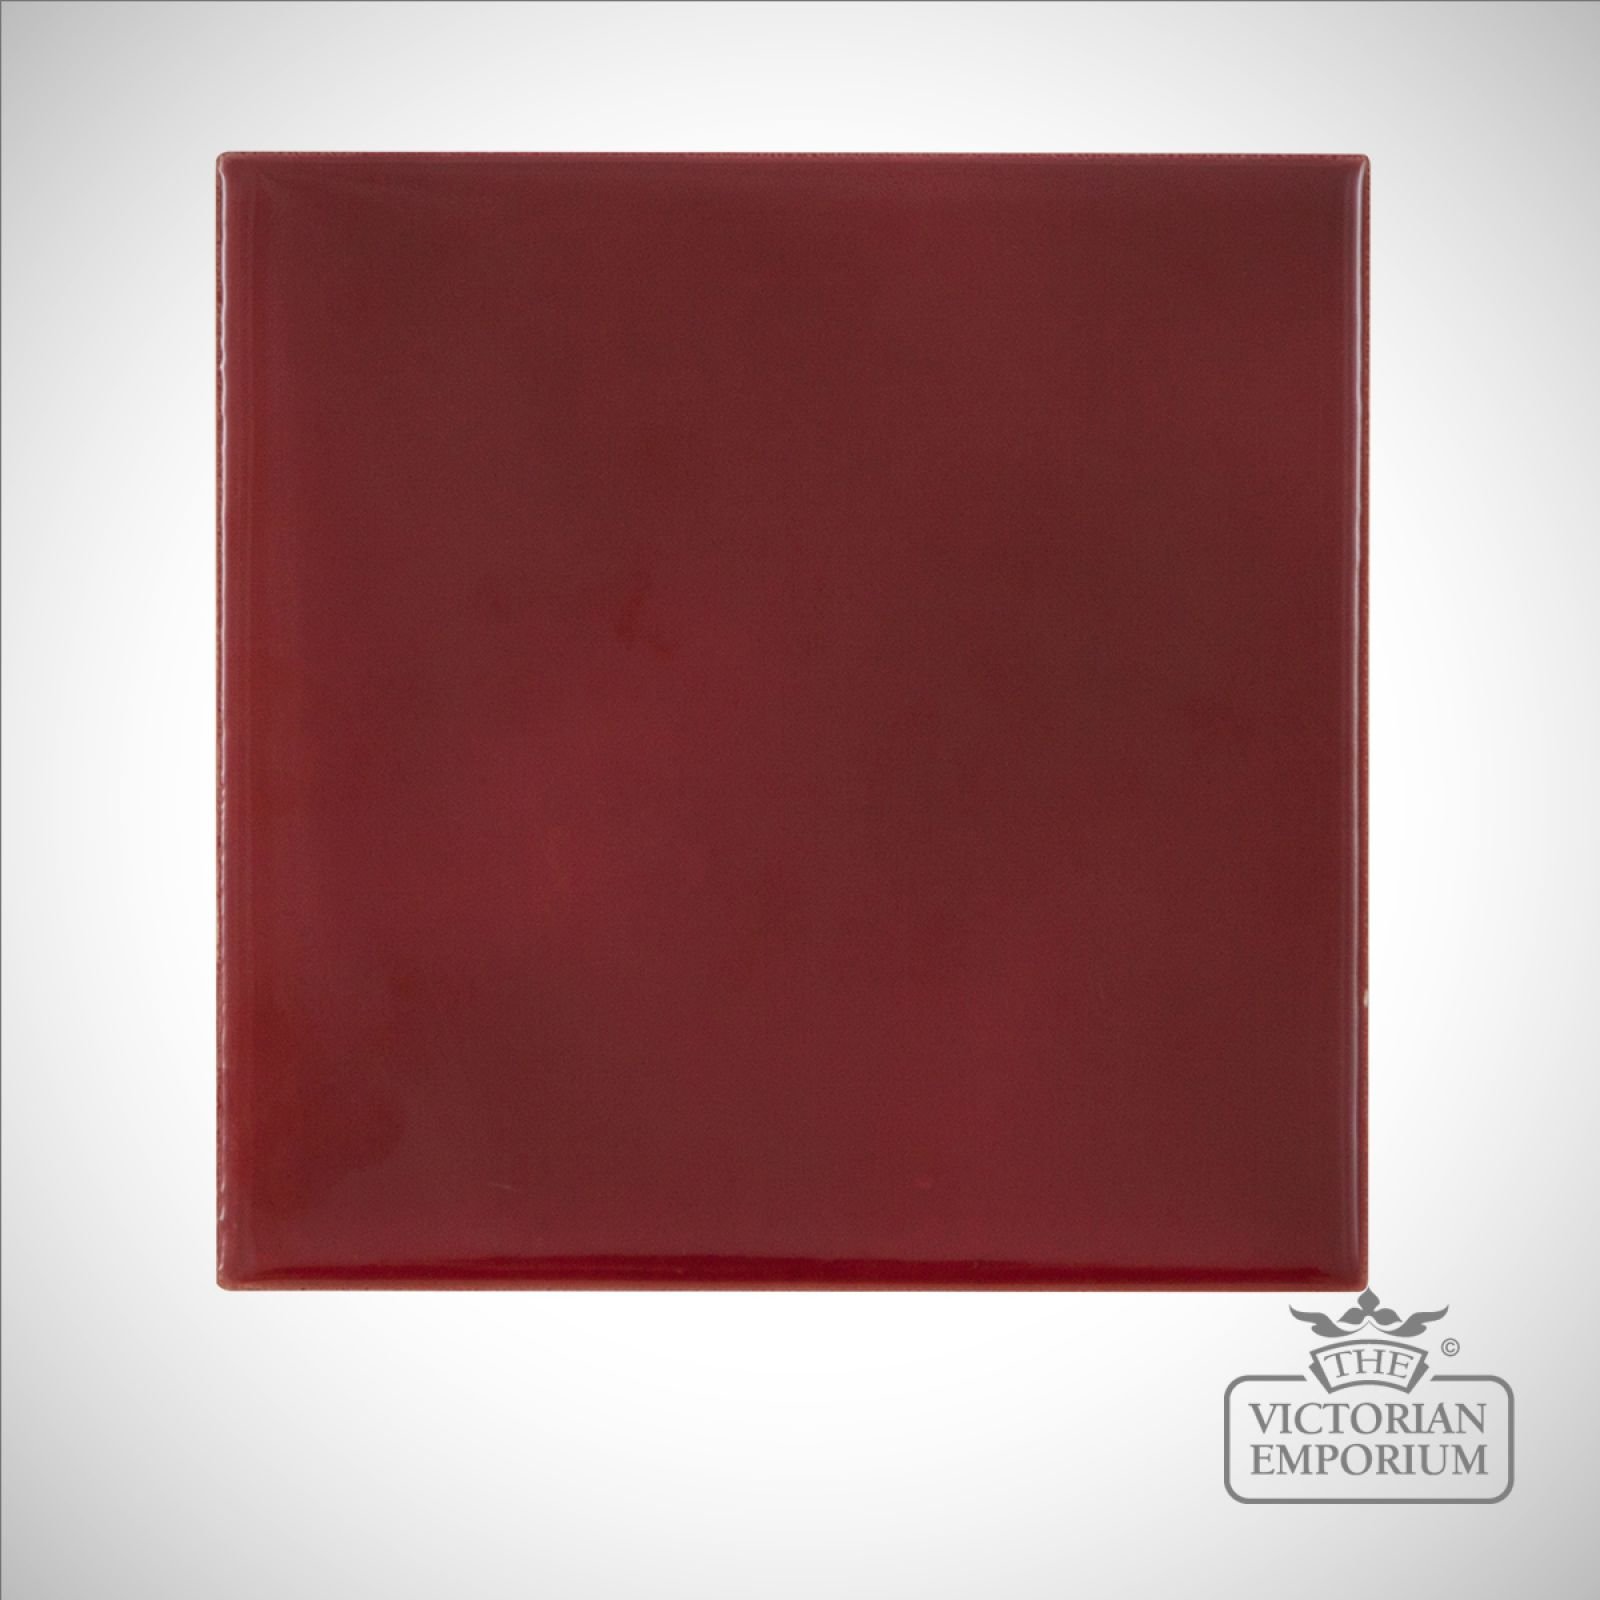 Deep red square fireplace tiles